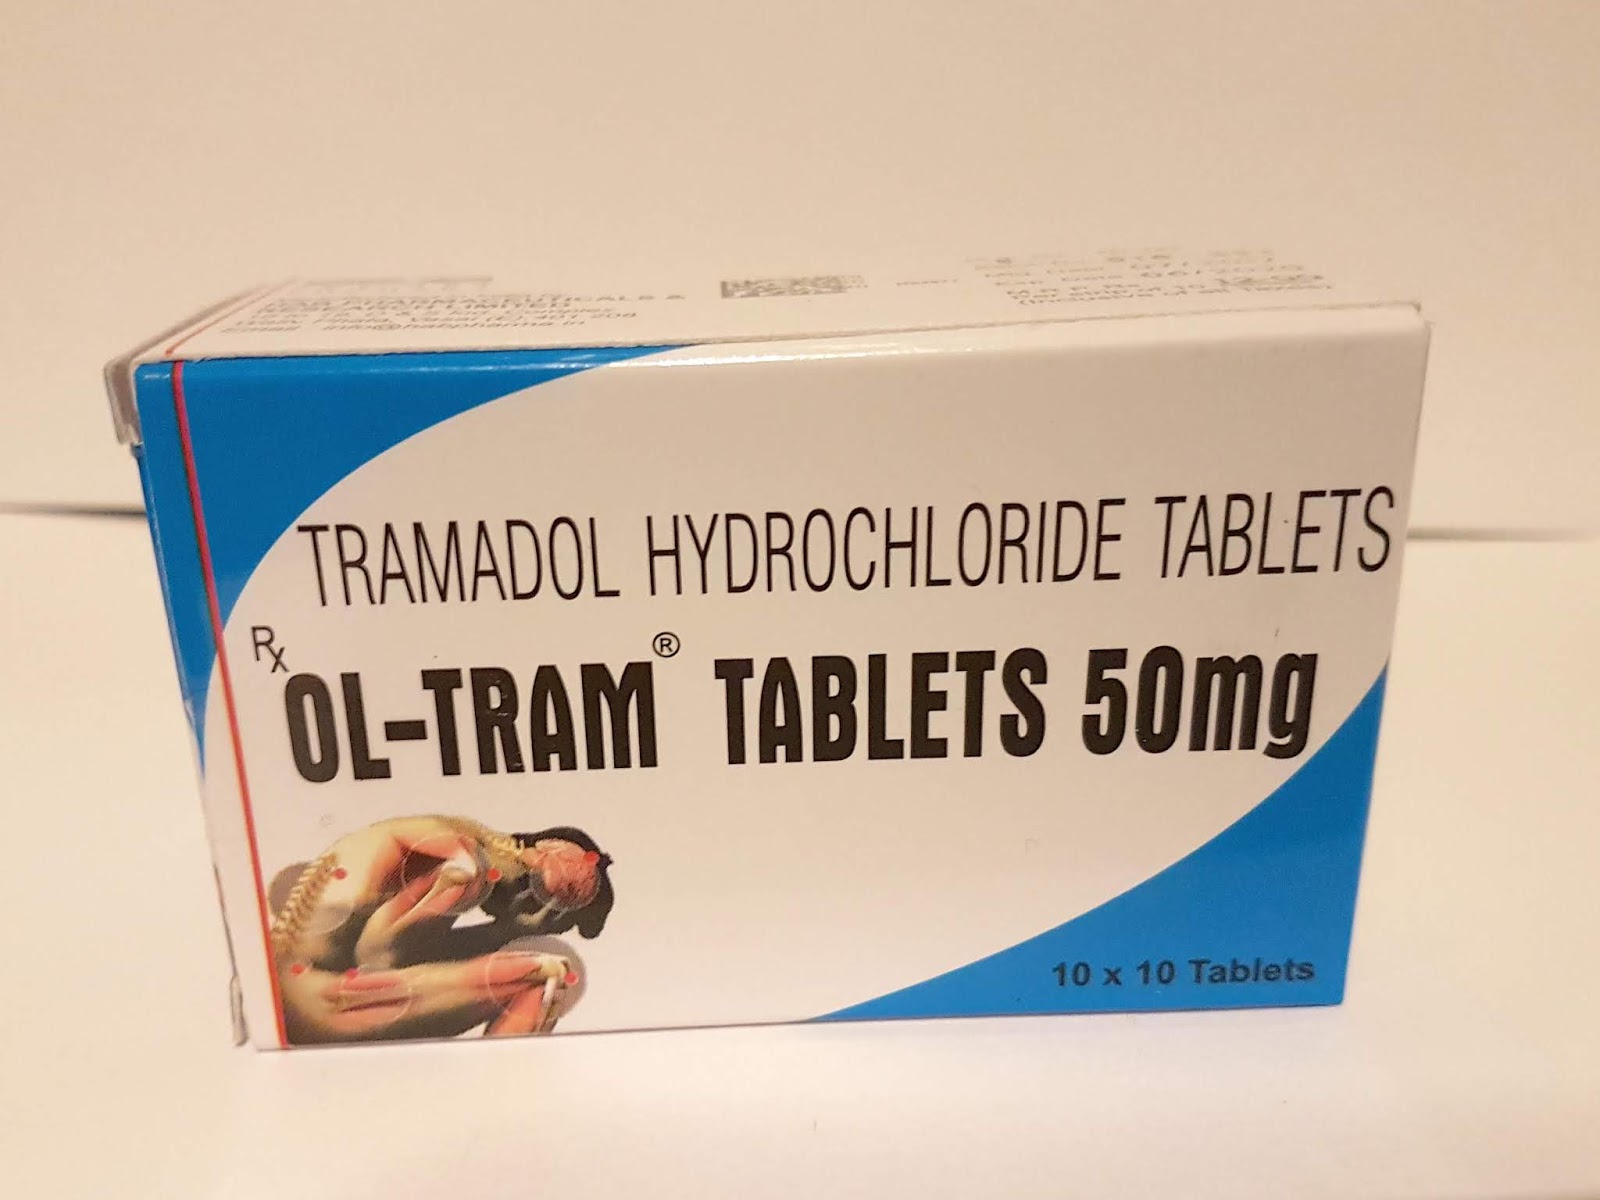 Can I Take Tramadol If I Have Stomach Ulcers